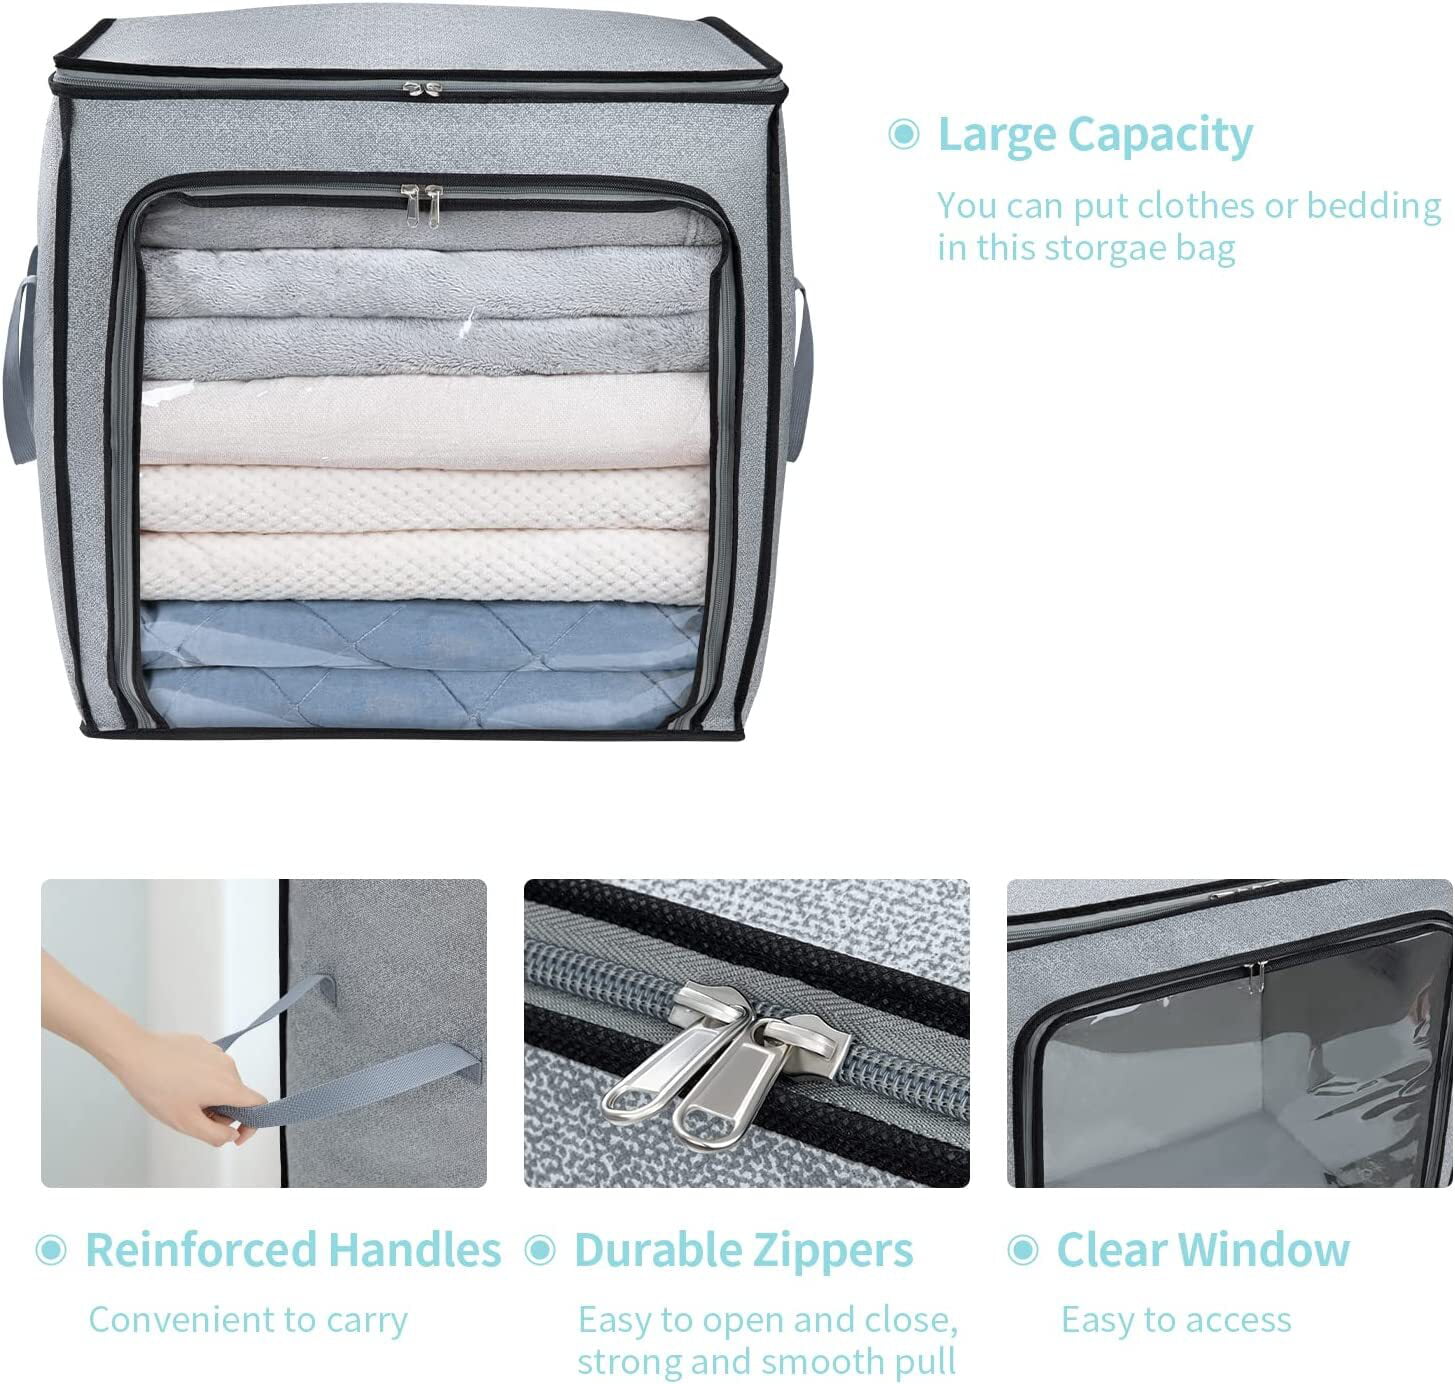 2/4/6 Pack Clothes Storage Bags, Premium Fabric, Foldable & Lightweight  with Clear Window, Reinforced Handle, and Sturdy Zipper - Ideal for  Bedroom, Closet, Comforter, Seasonal Clothing & More, Perfect Size for  Organizing 